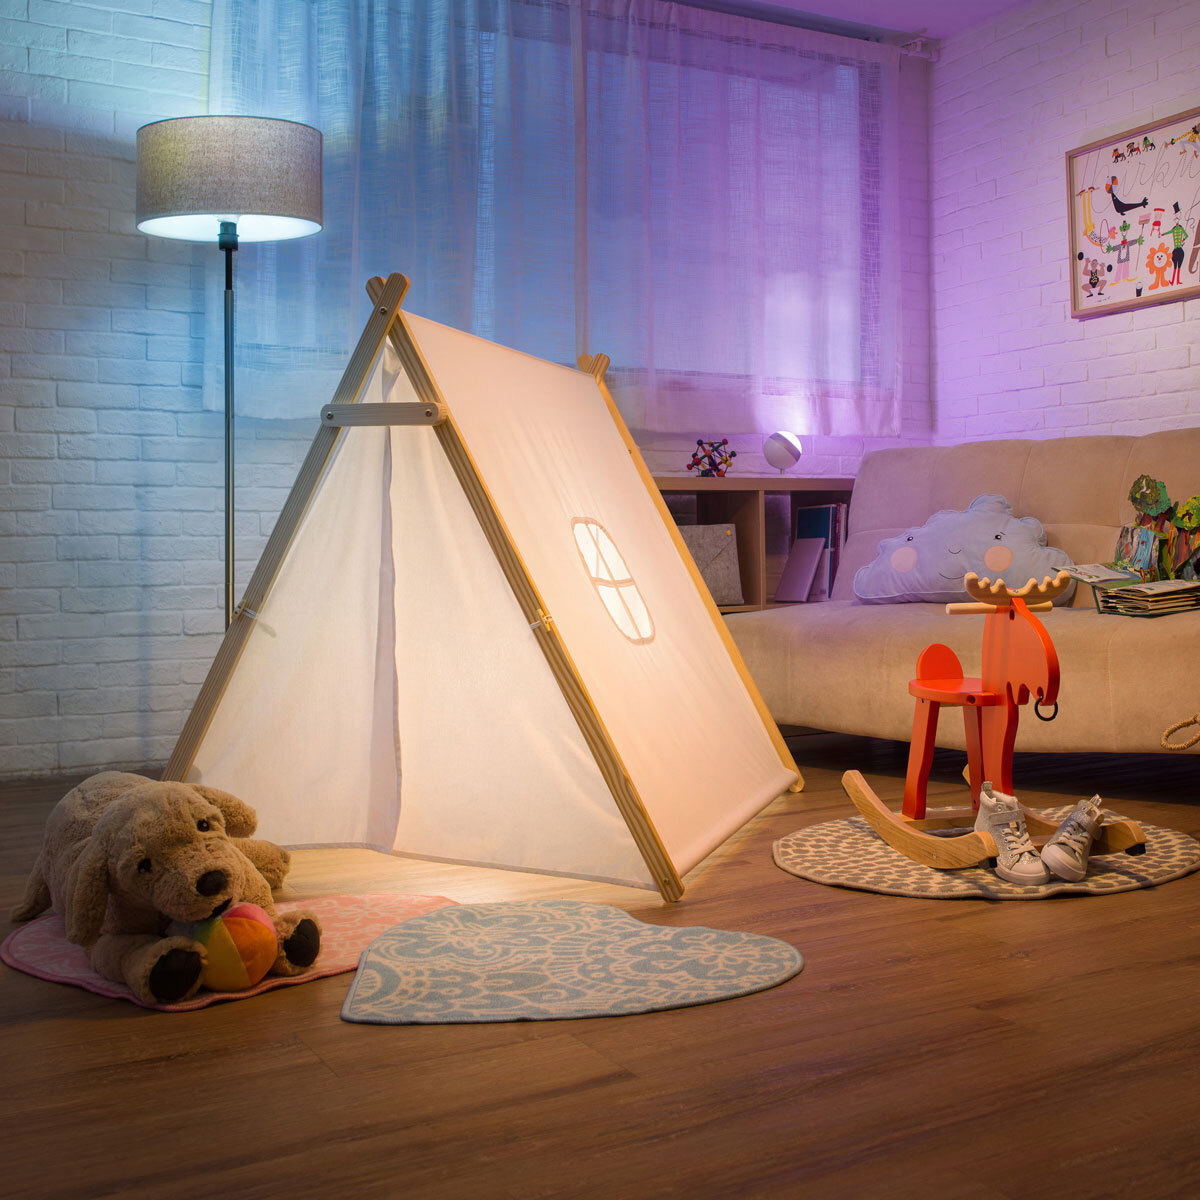 Lifestyle image of living room with tent and light bulbs in use